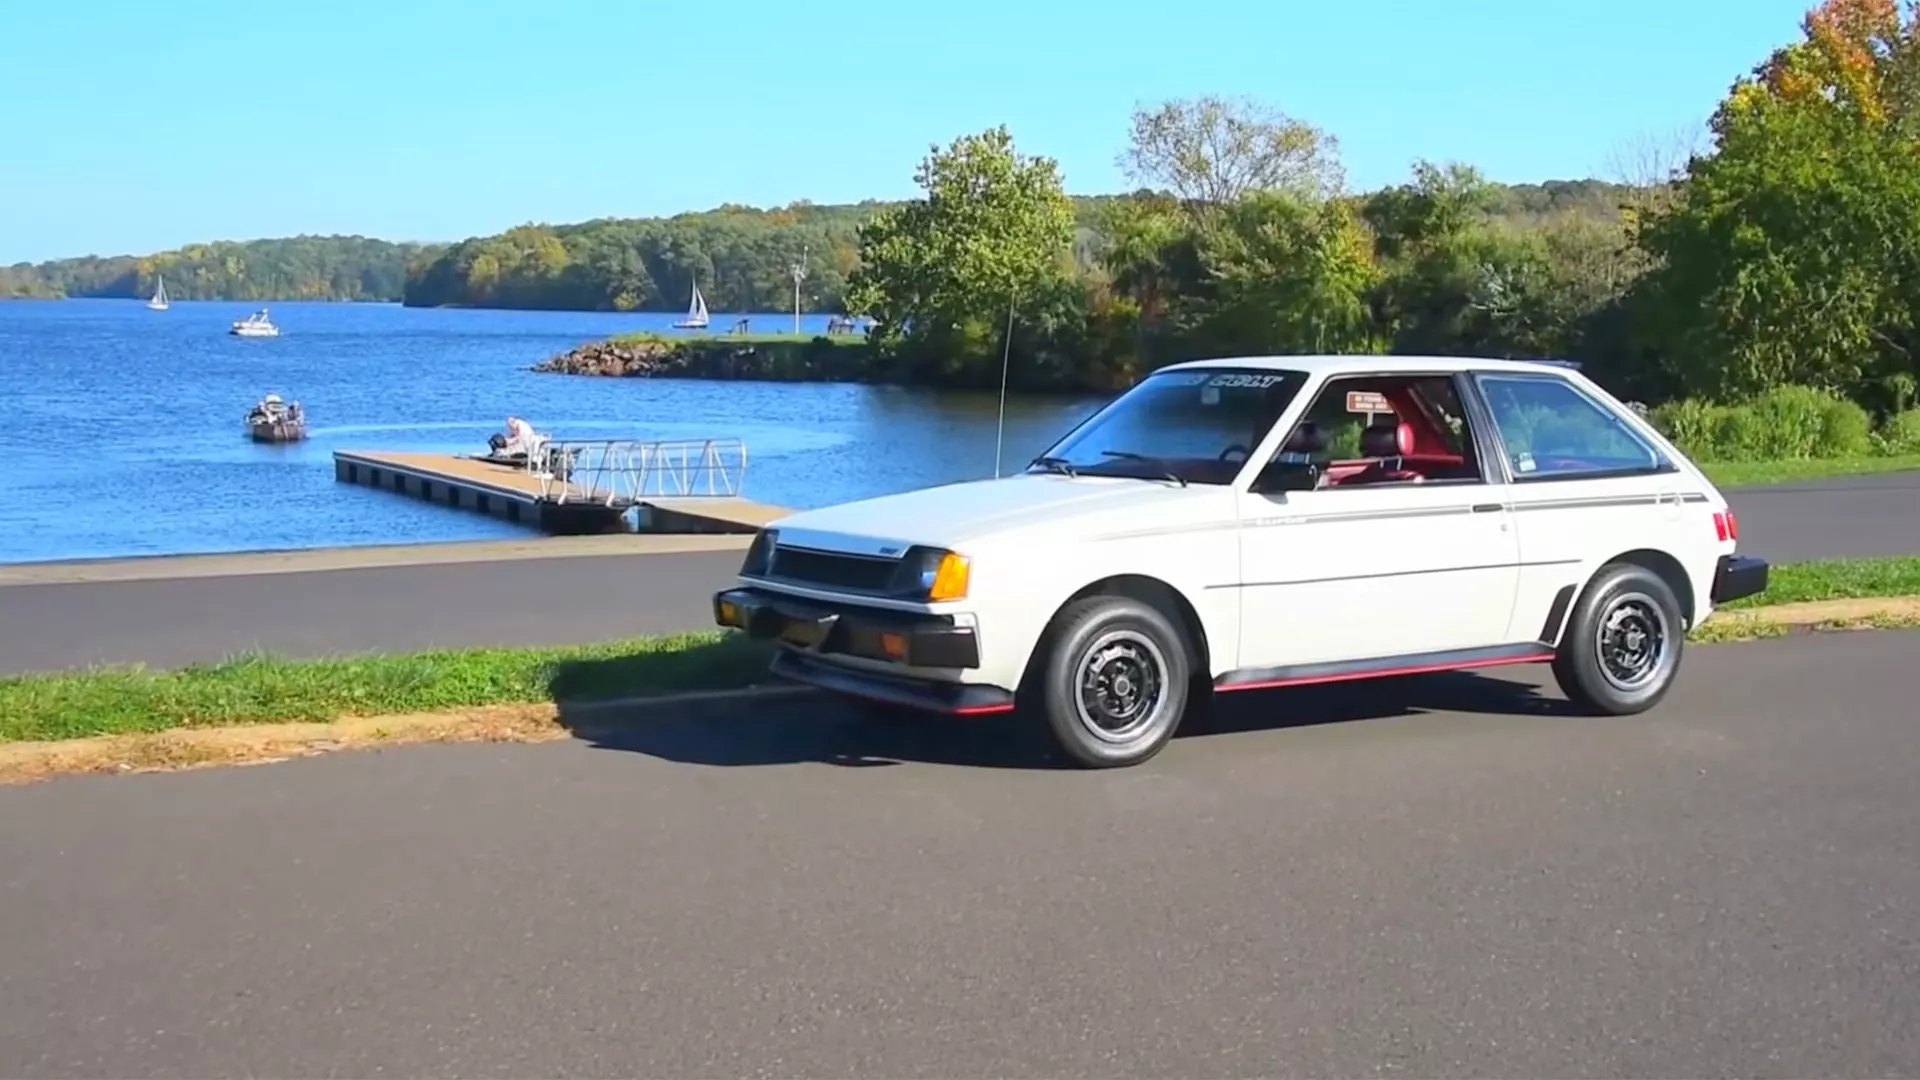 The Plymouth Colt GTS Was an ’80s Hot Hatch With Low-Range Gearing